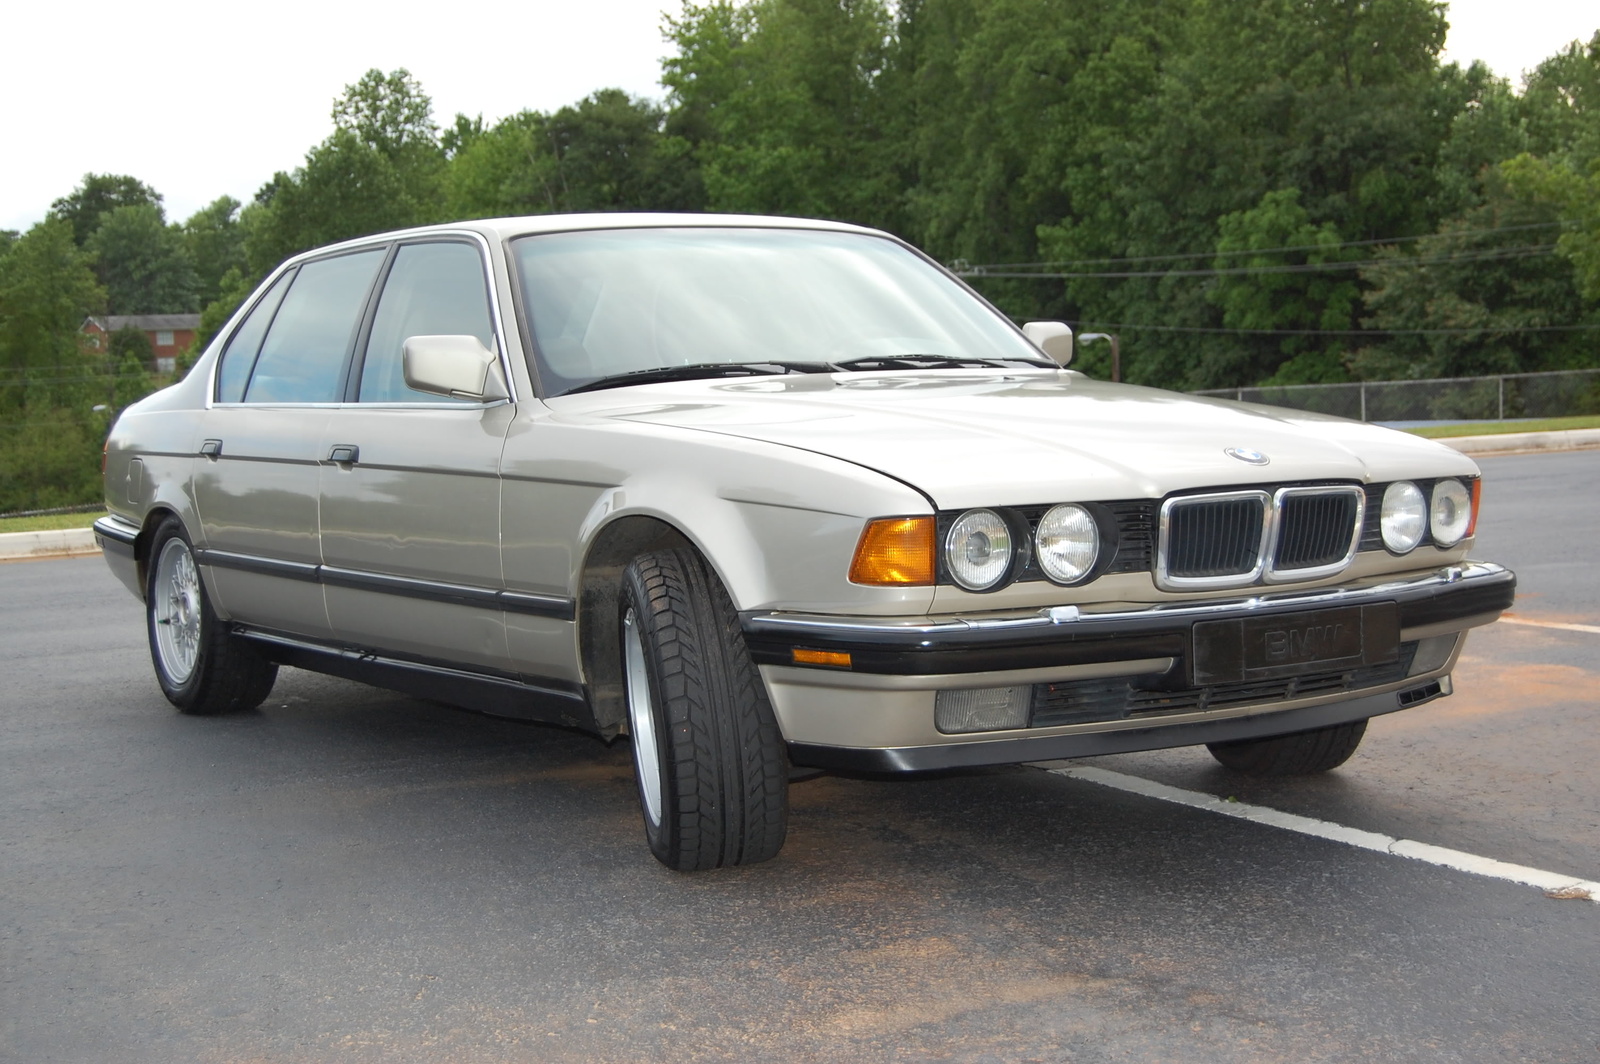 1989 Bmw 750il v12 review #5